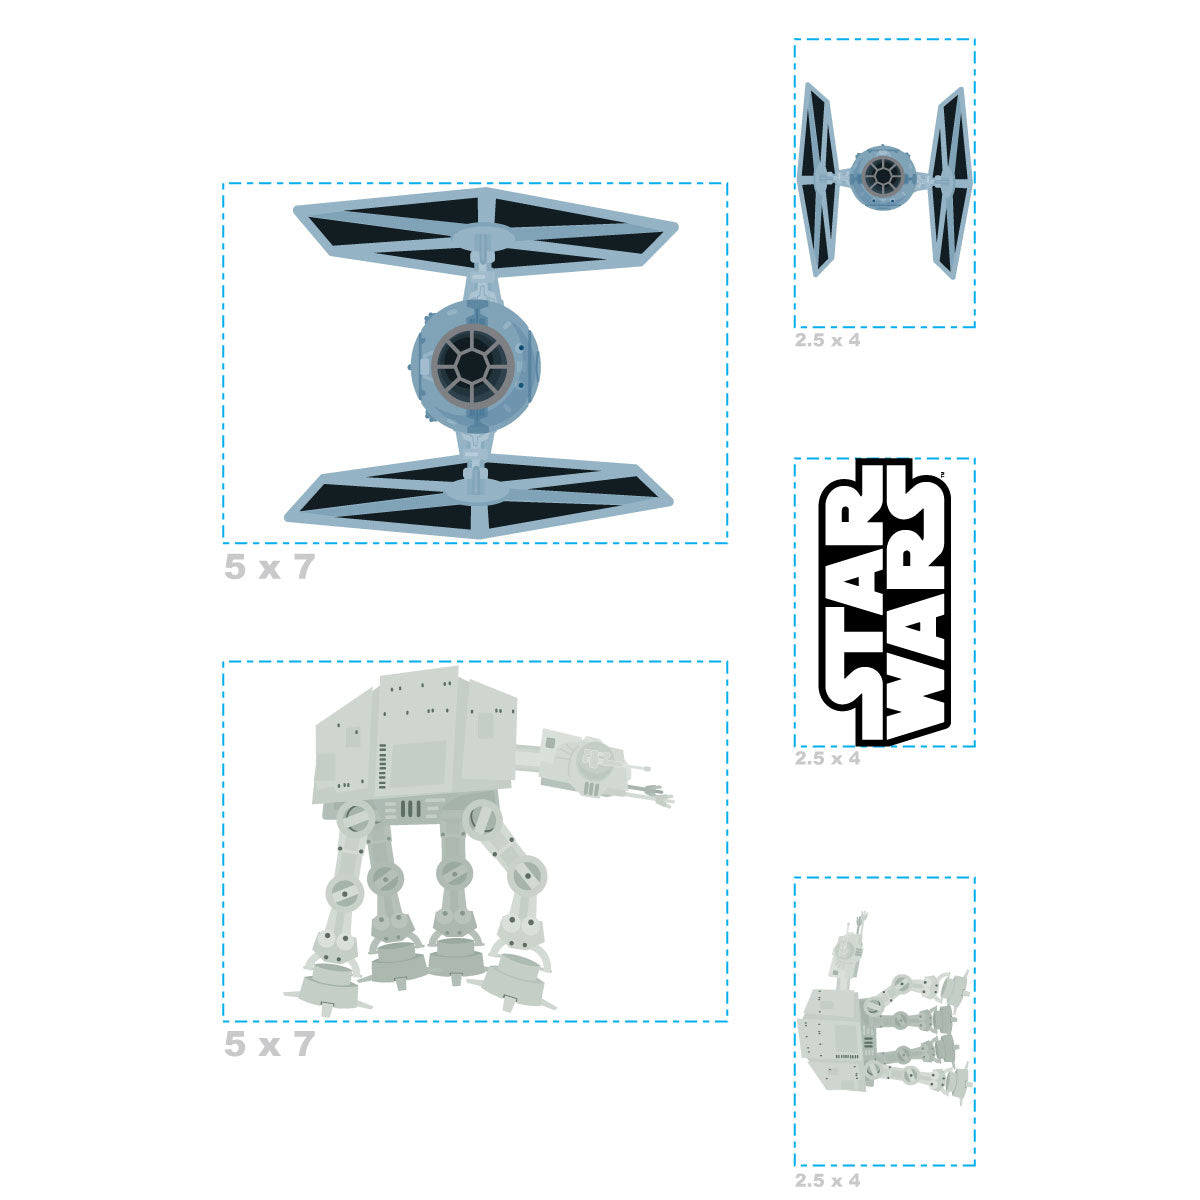 Sheet of 5 -IMPERIAL VEHICLES Minis        - Officially Licensed Star Wars Removable    Adhesive Decal